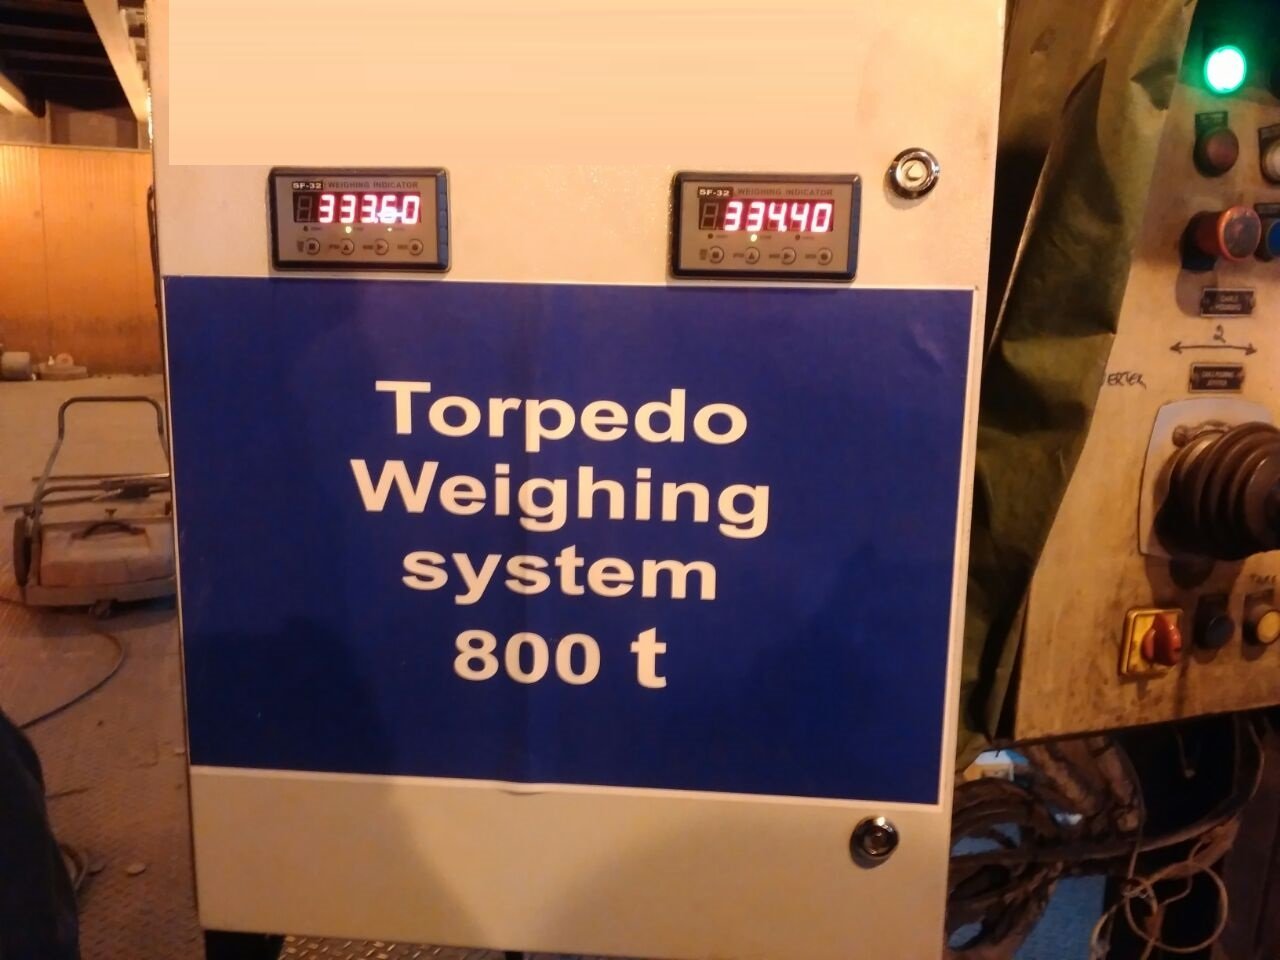 Torpedo Ladle Car Weighing System manufacturer & oem manufacturer, weighing system, full draft, weighing scales & measuring tapes